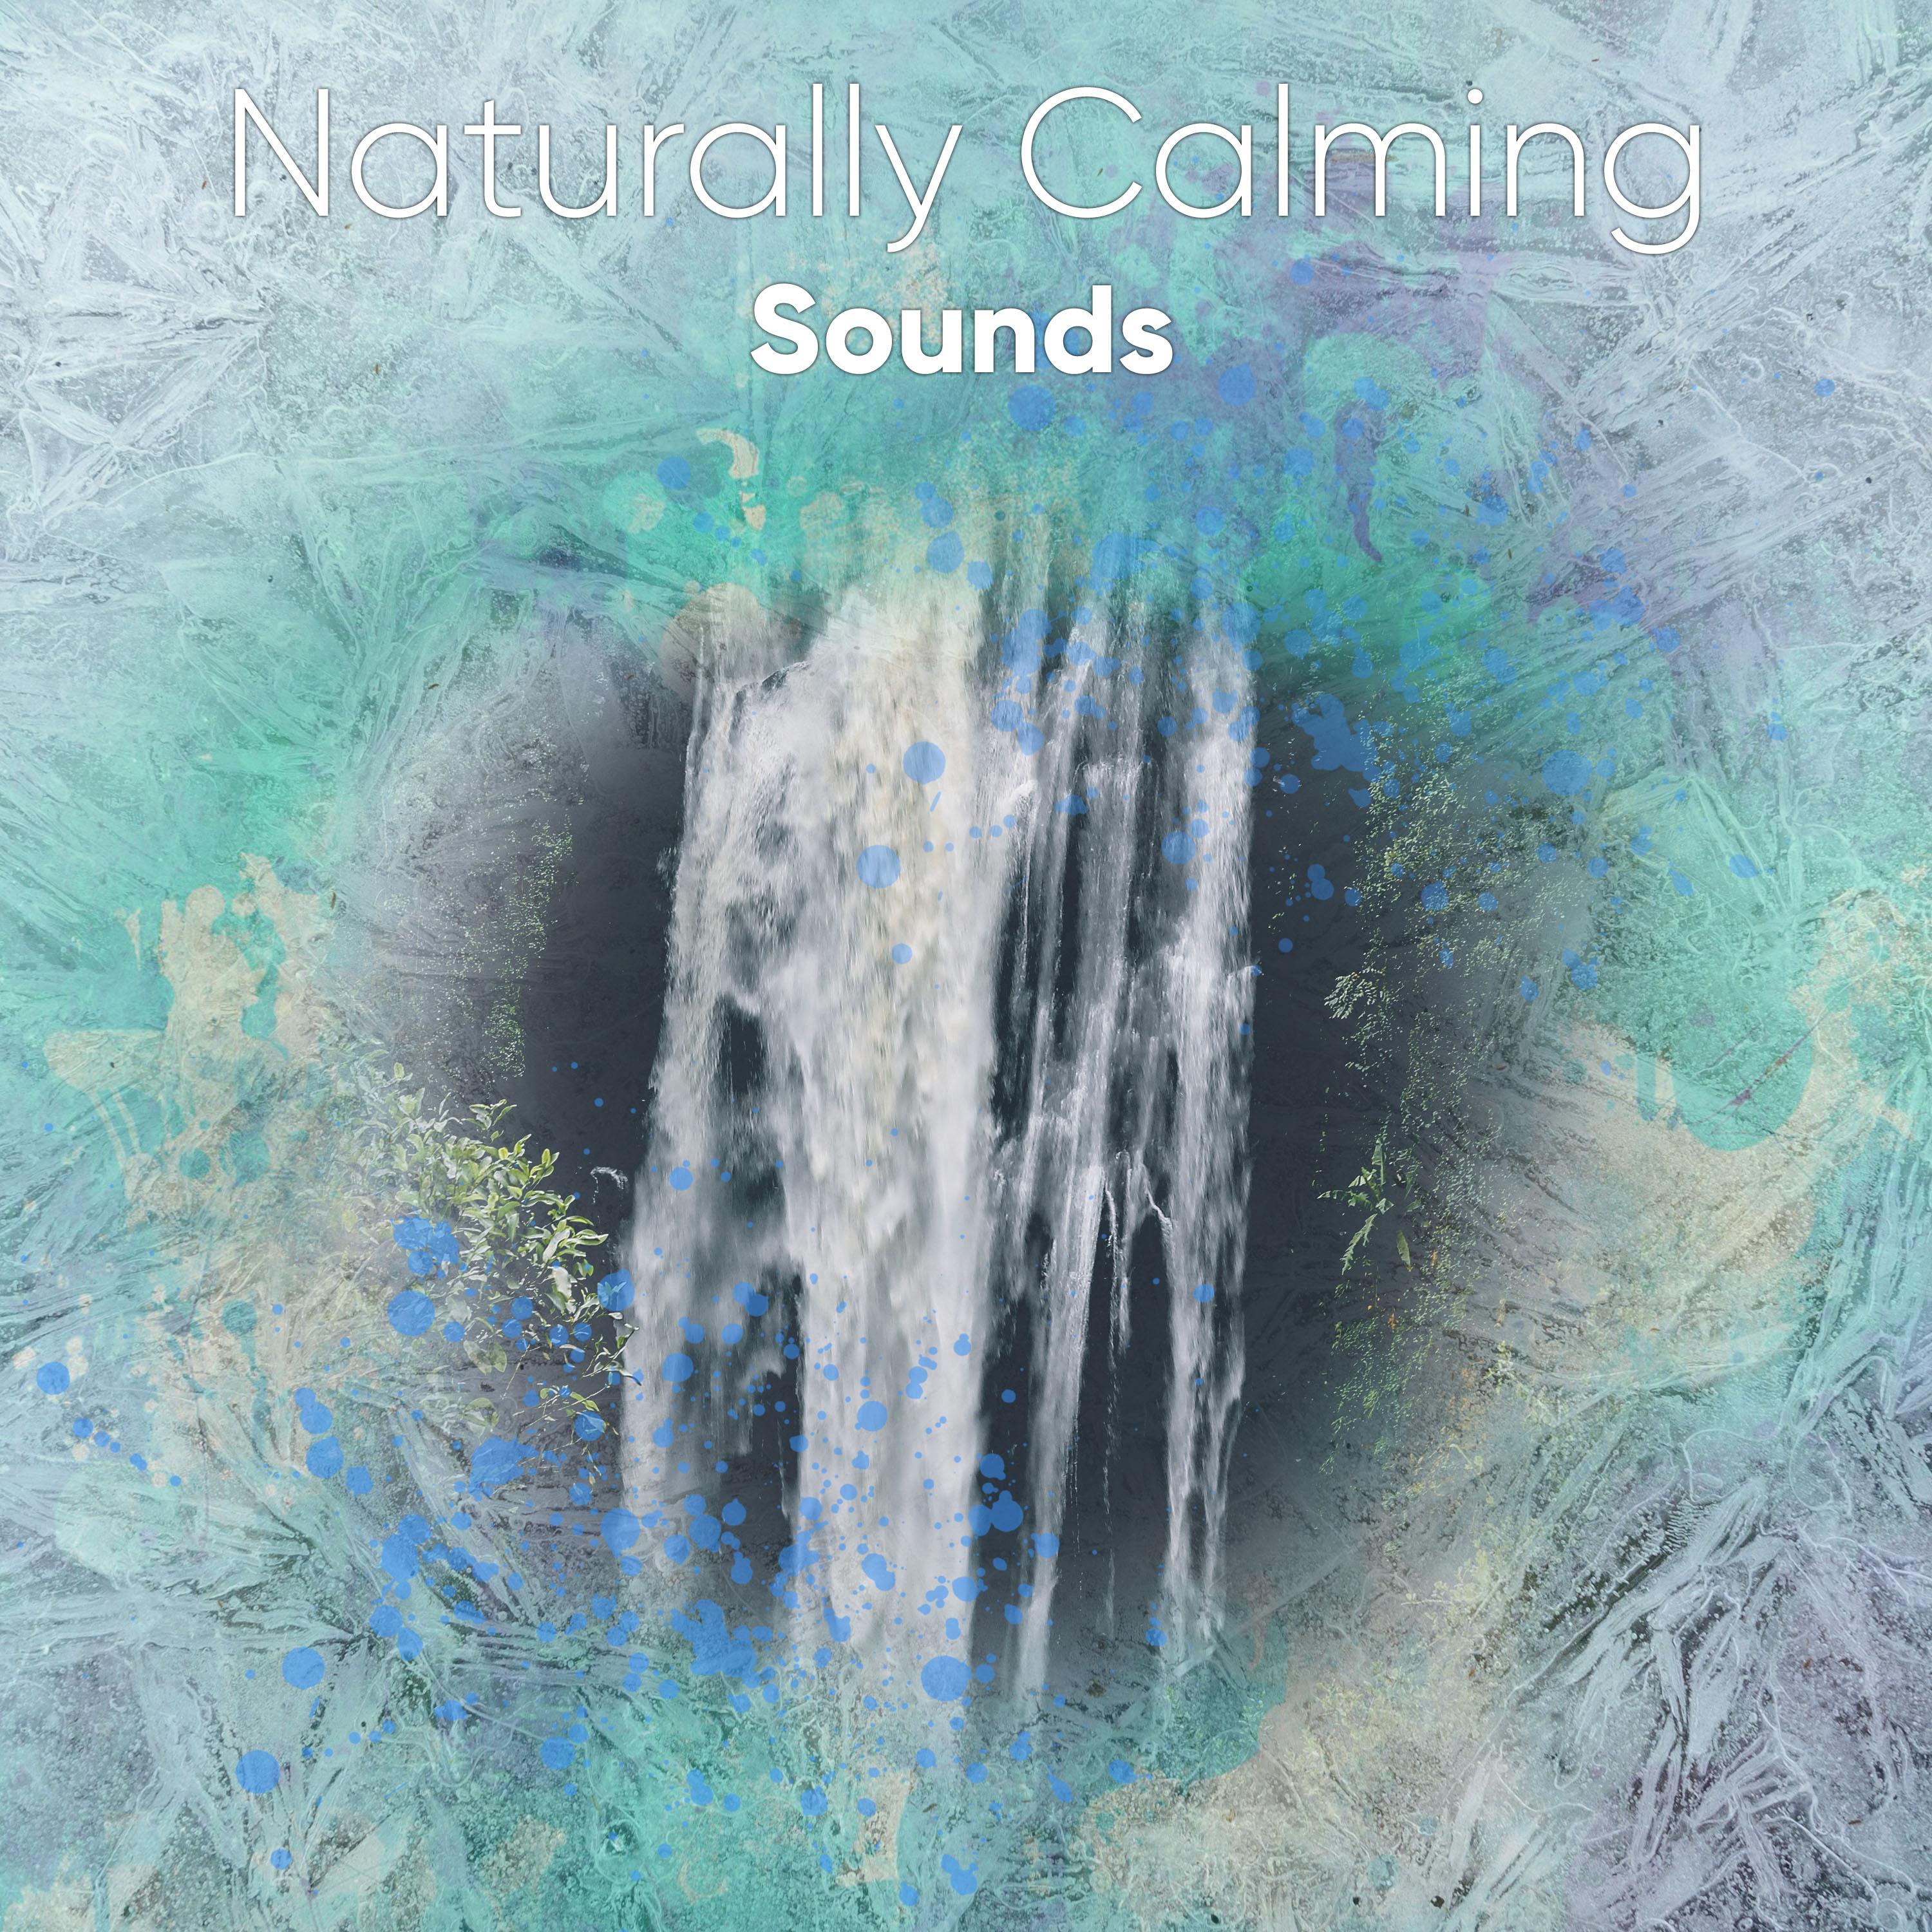 #1 Hour of Naturally Calming Sounds for Yoga